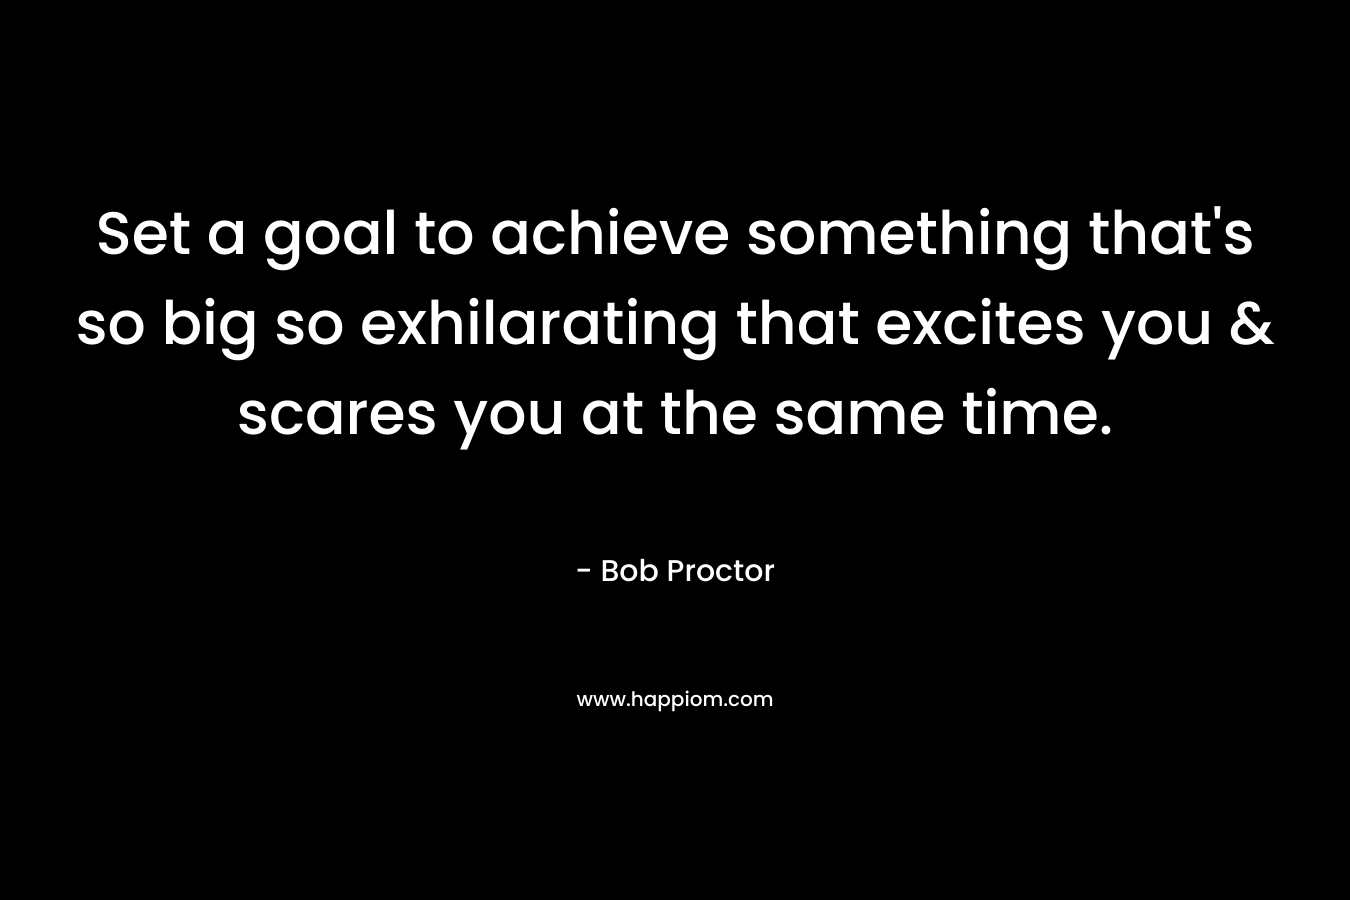 Set a goal to achieve something that's so big so exhilarating that excites you & scares you at the same time.